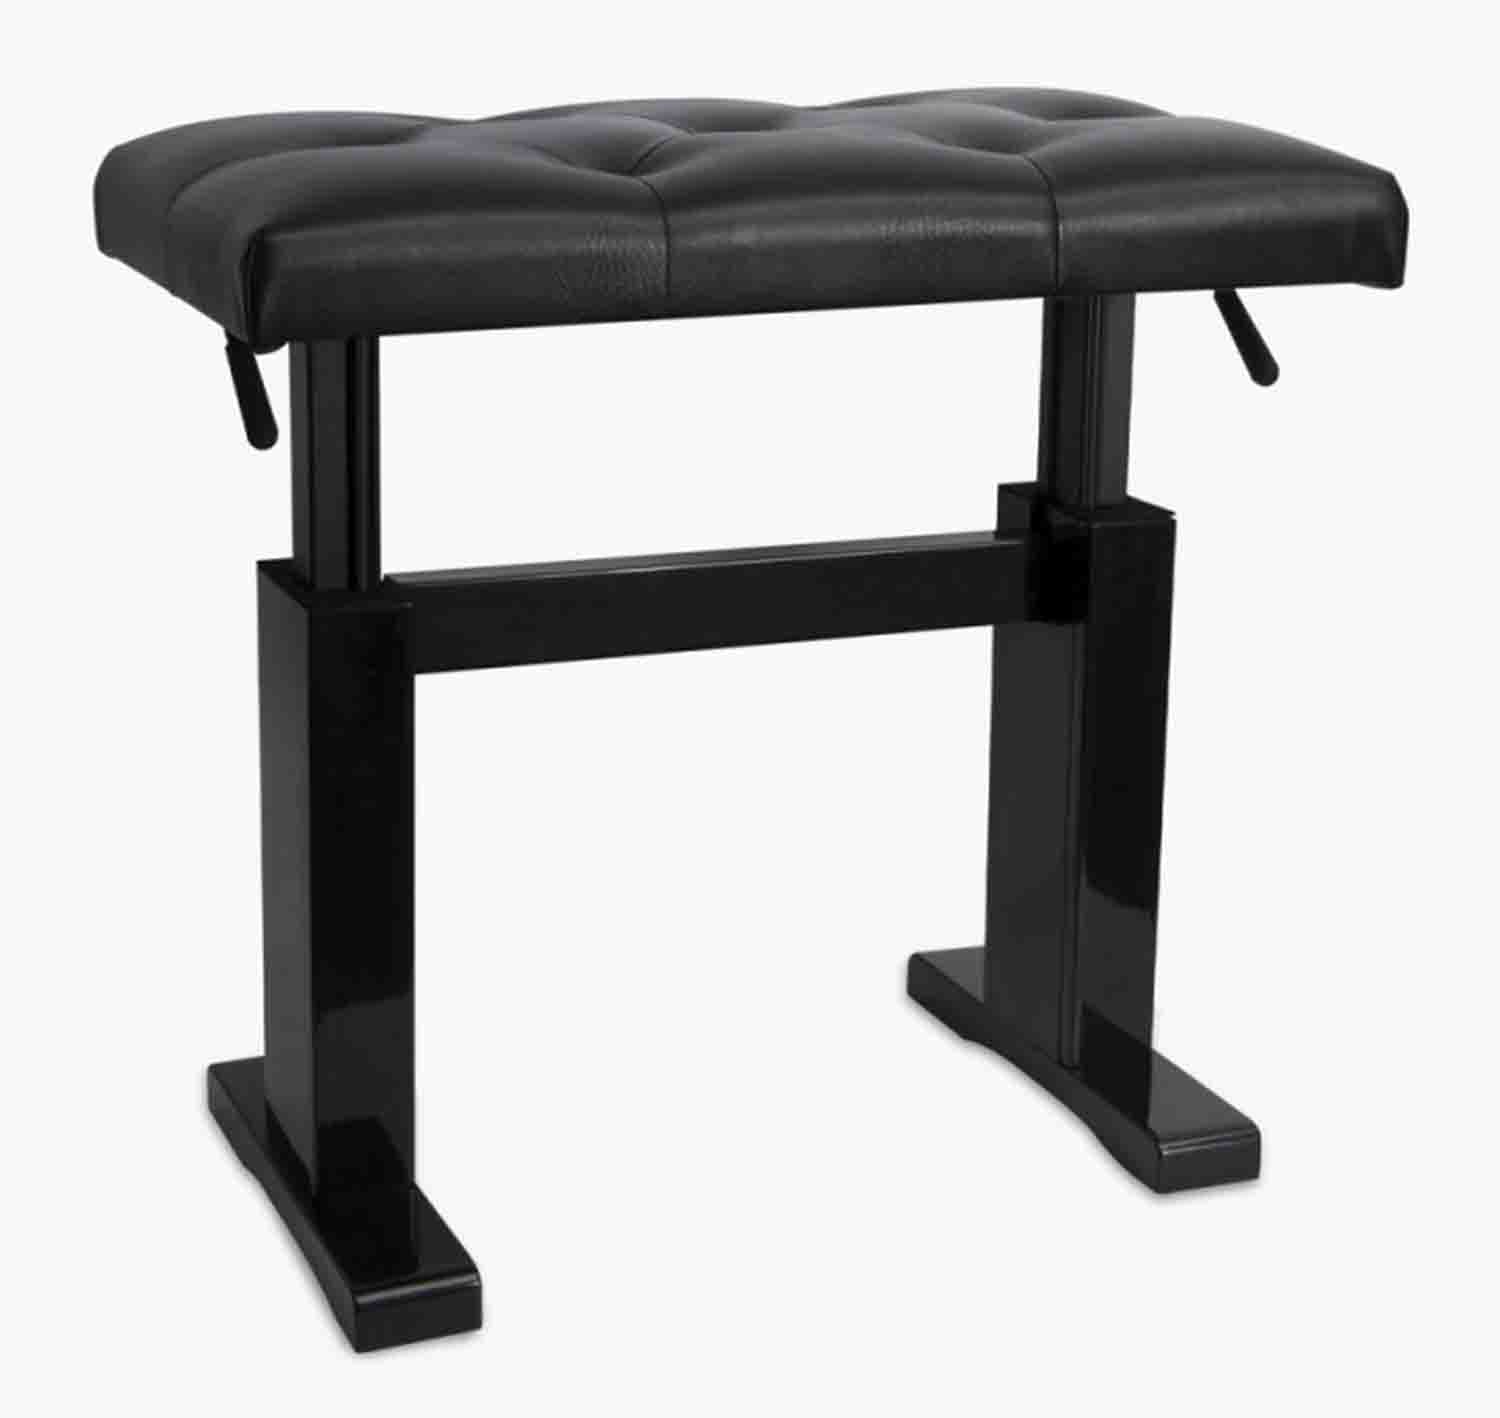 Onstage KB9503B Piano Bench with Adjustable Height - Black - Hollywood DJ